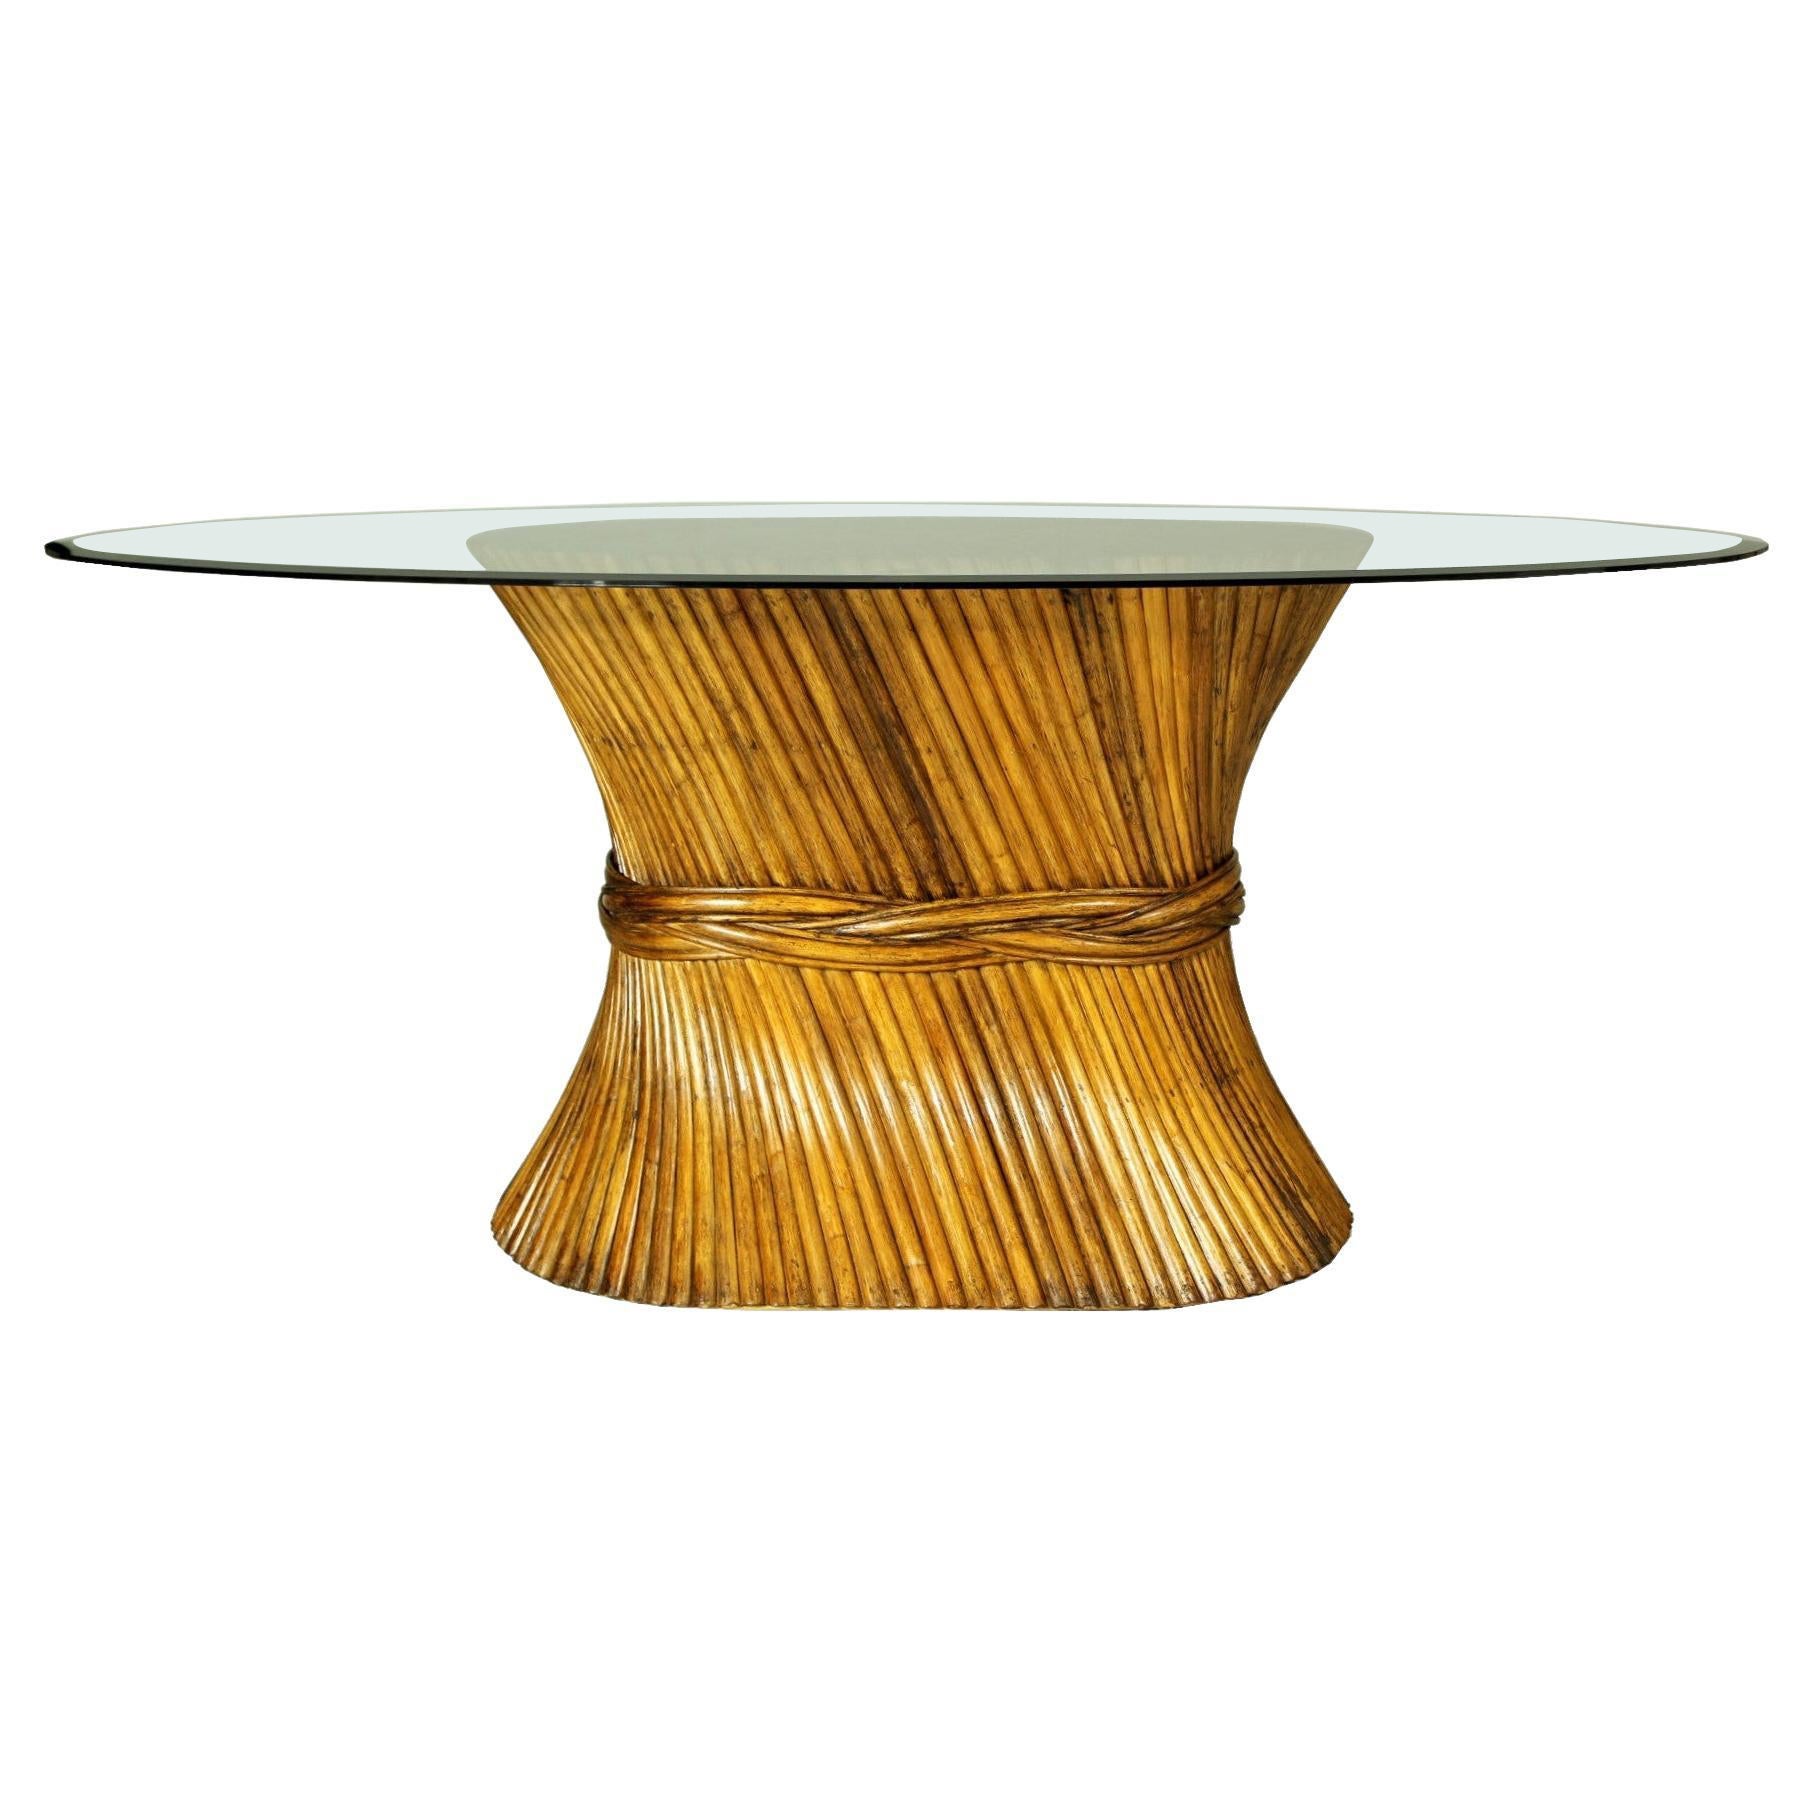 Sheaf of Wheat Bamboo Dining Table from McGuire, 1970s For Sale